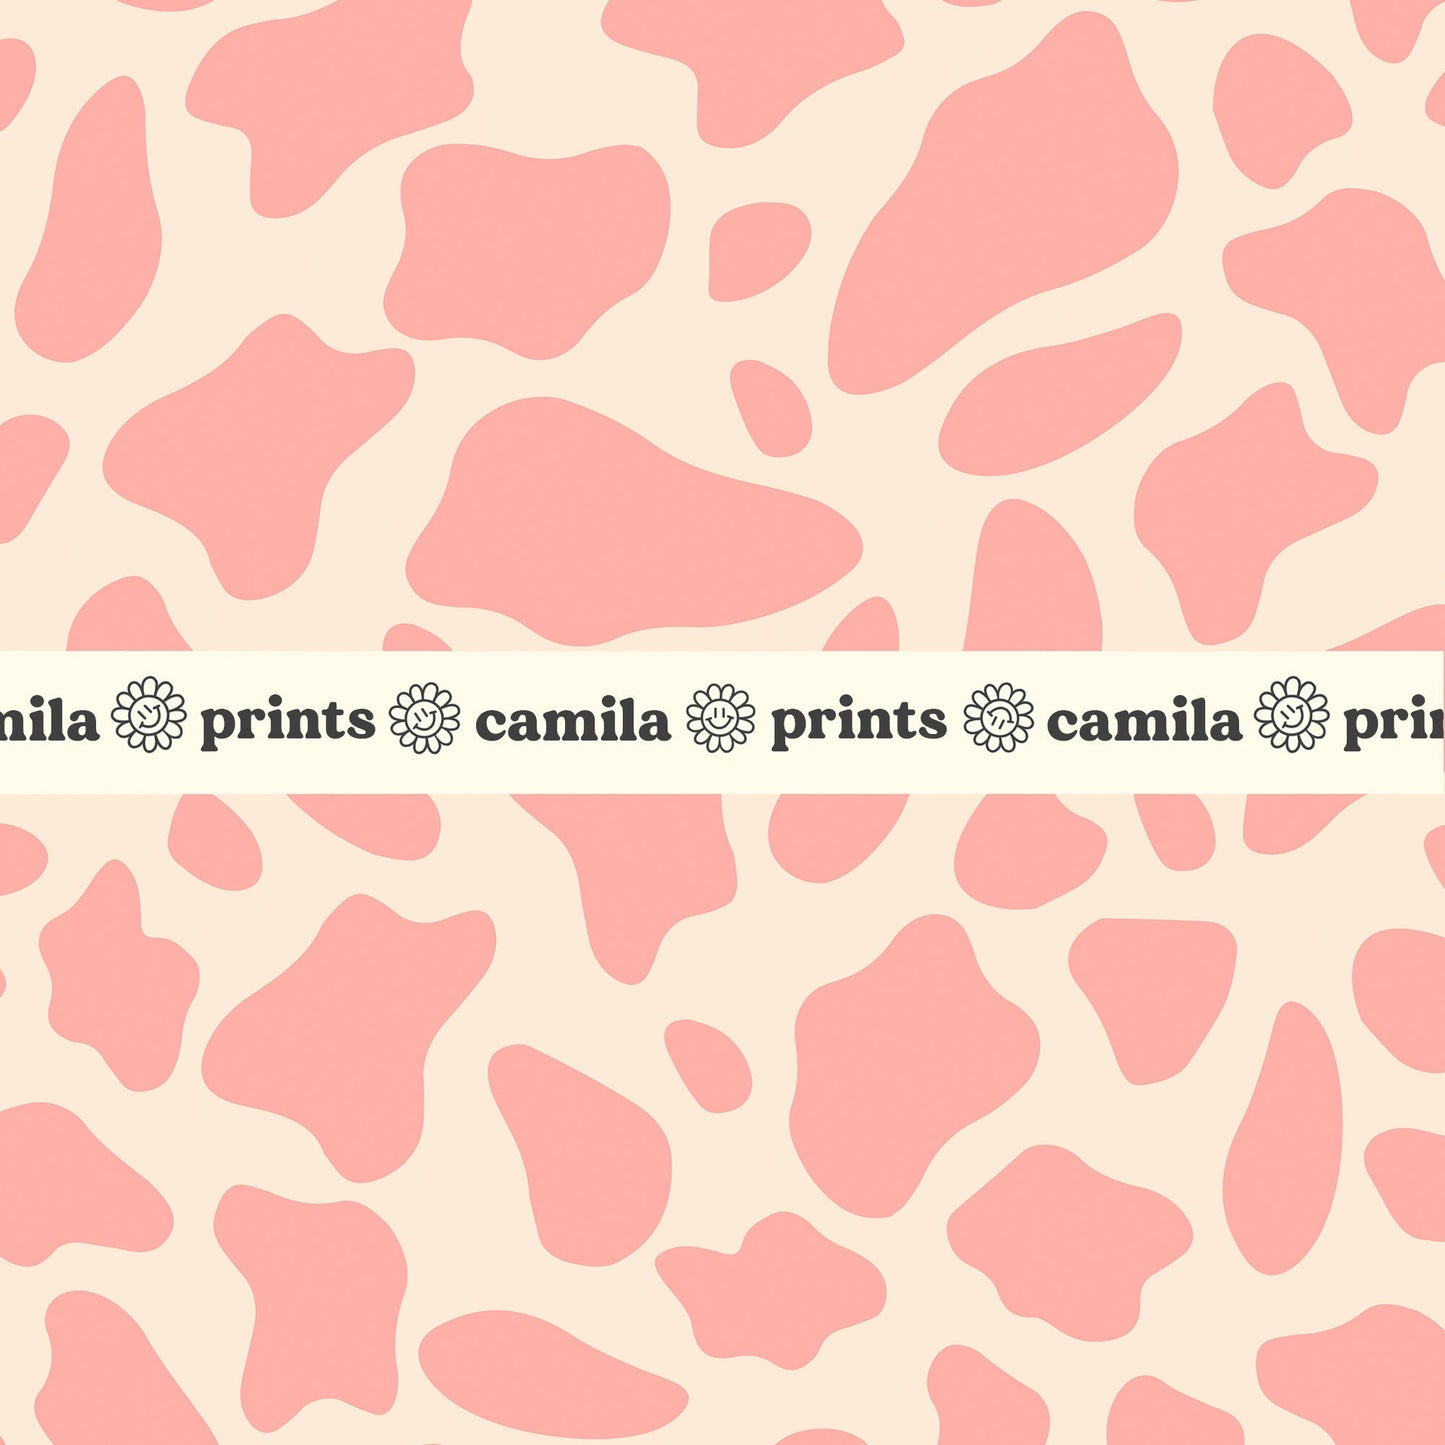 Cow Print Pattern, Western Seamless Pattern, Pink Seamless File for Fabric Printing